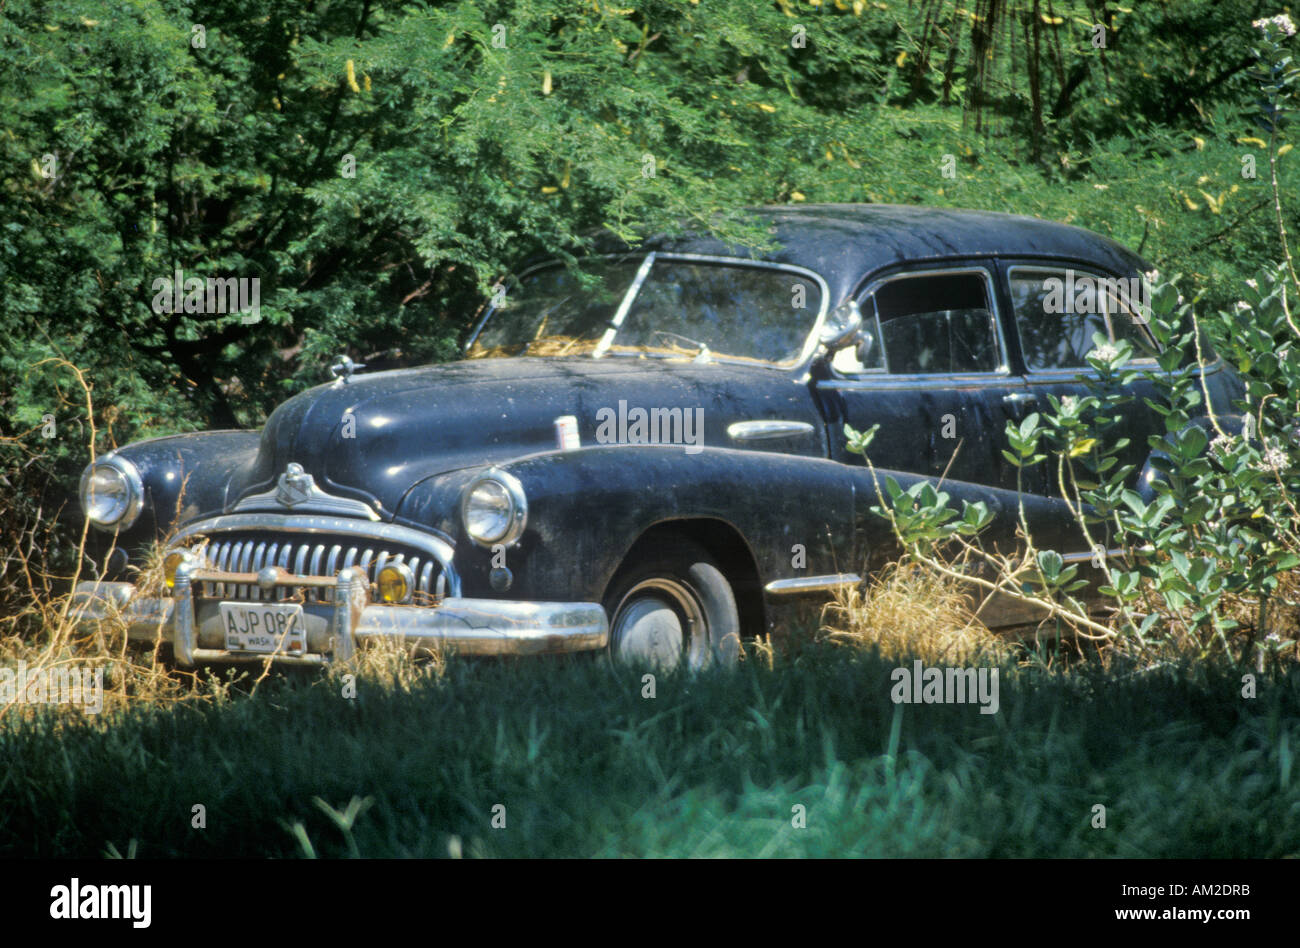 A junk car sitting in overgrown trees in Hawaii Stock Photo